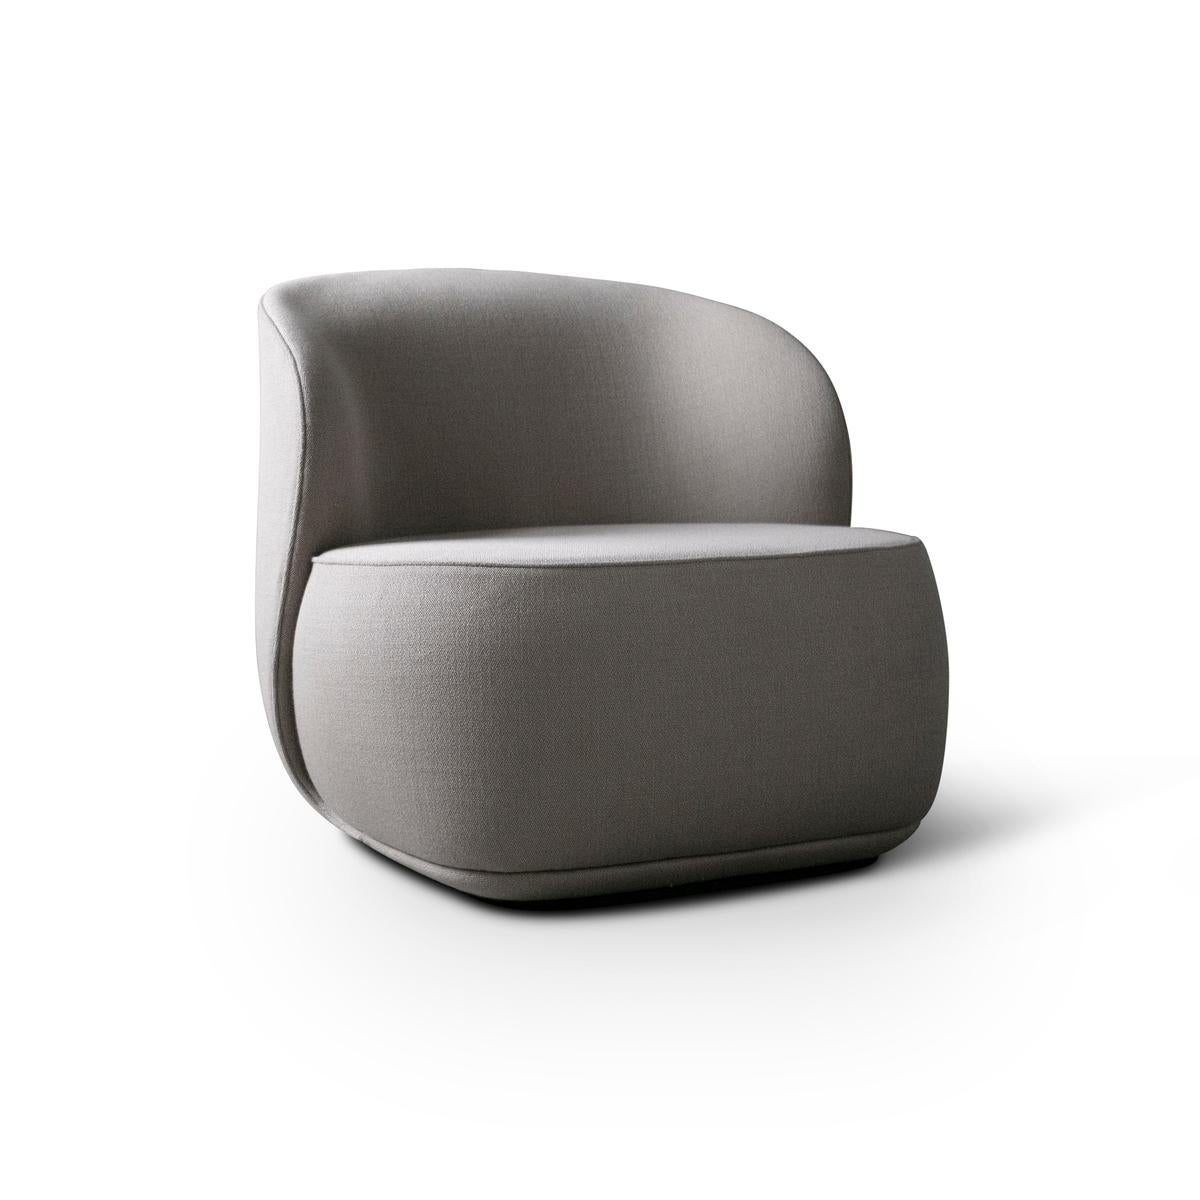 La Pipe lounge - armchair
Design: Friends & Founders

Available with fixed base or return swivel
Upholstery available in a wide range of fabrics and leathers
Model shown (fabric): Kvadrat, Vidar x Raf Simons 222

Price may vary depending on